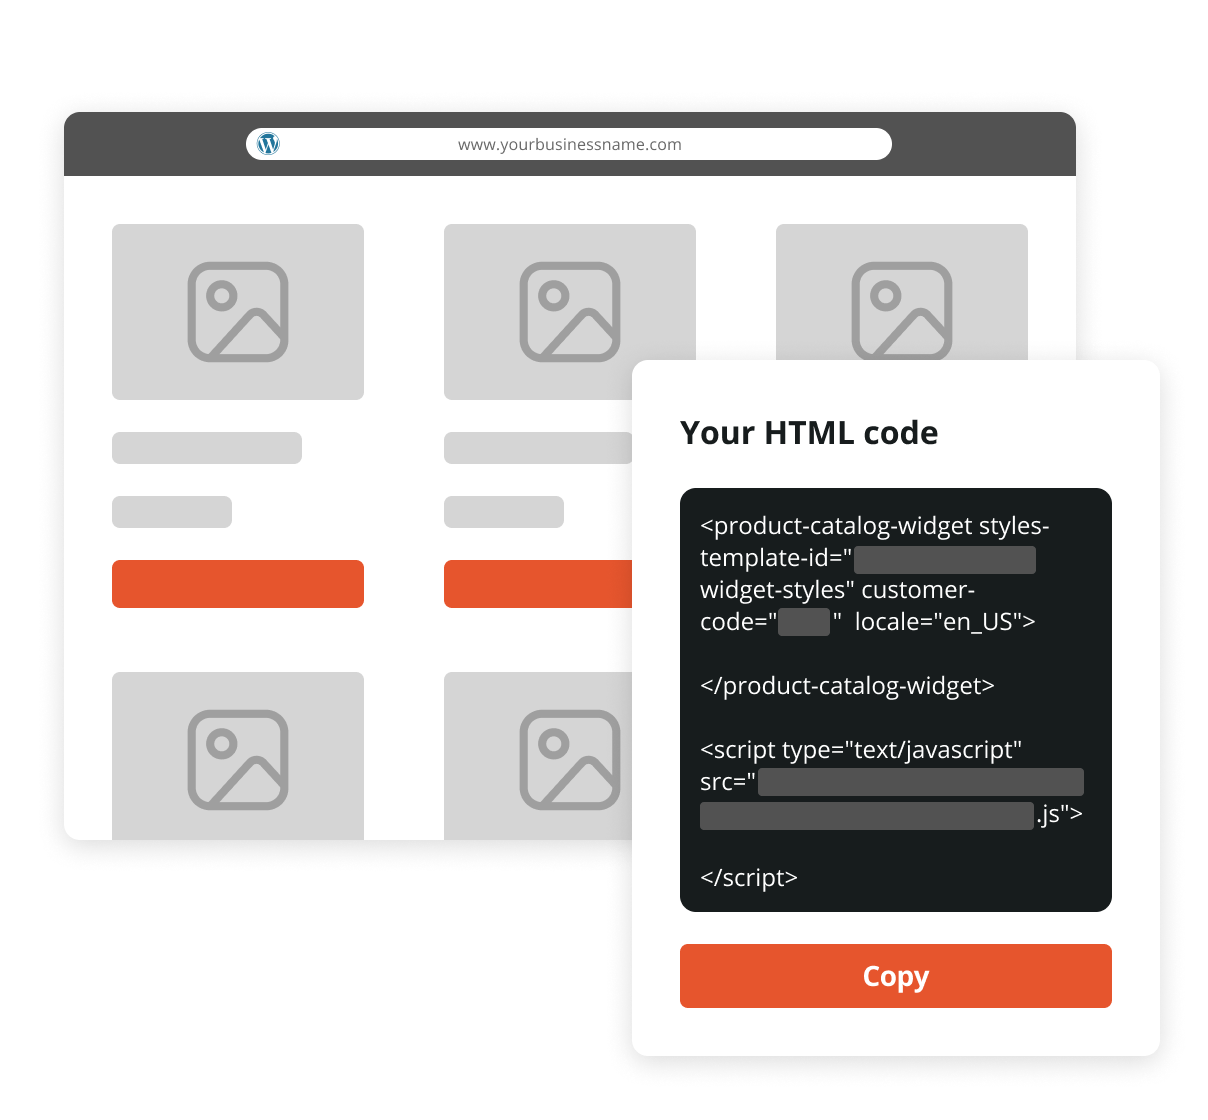 Integrate with your CMS, payment providers and Zapier